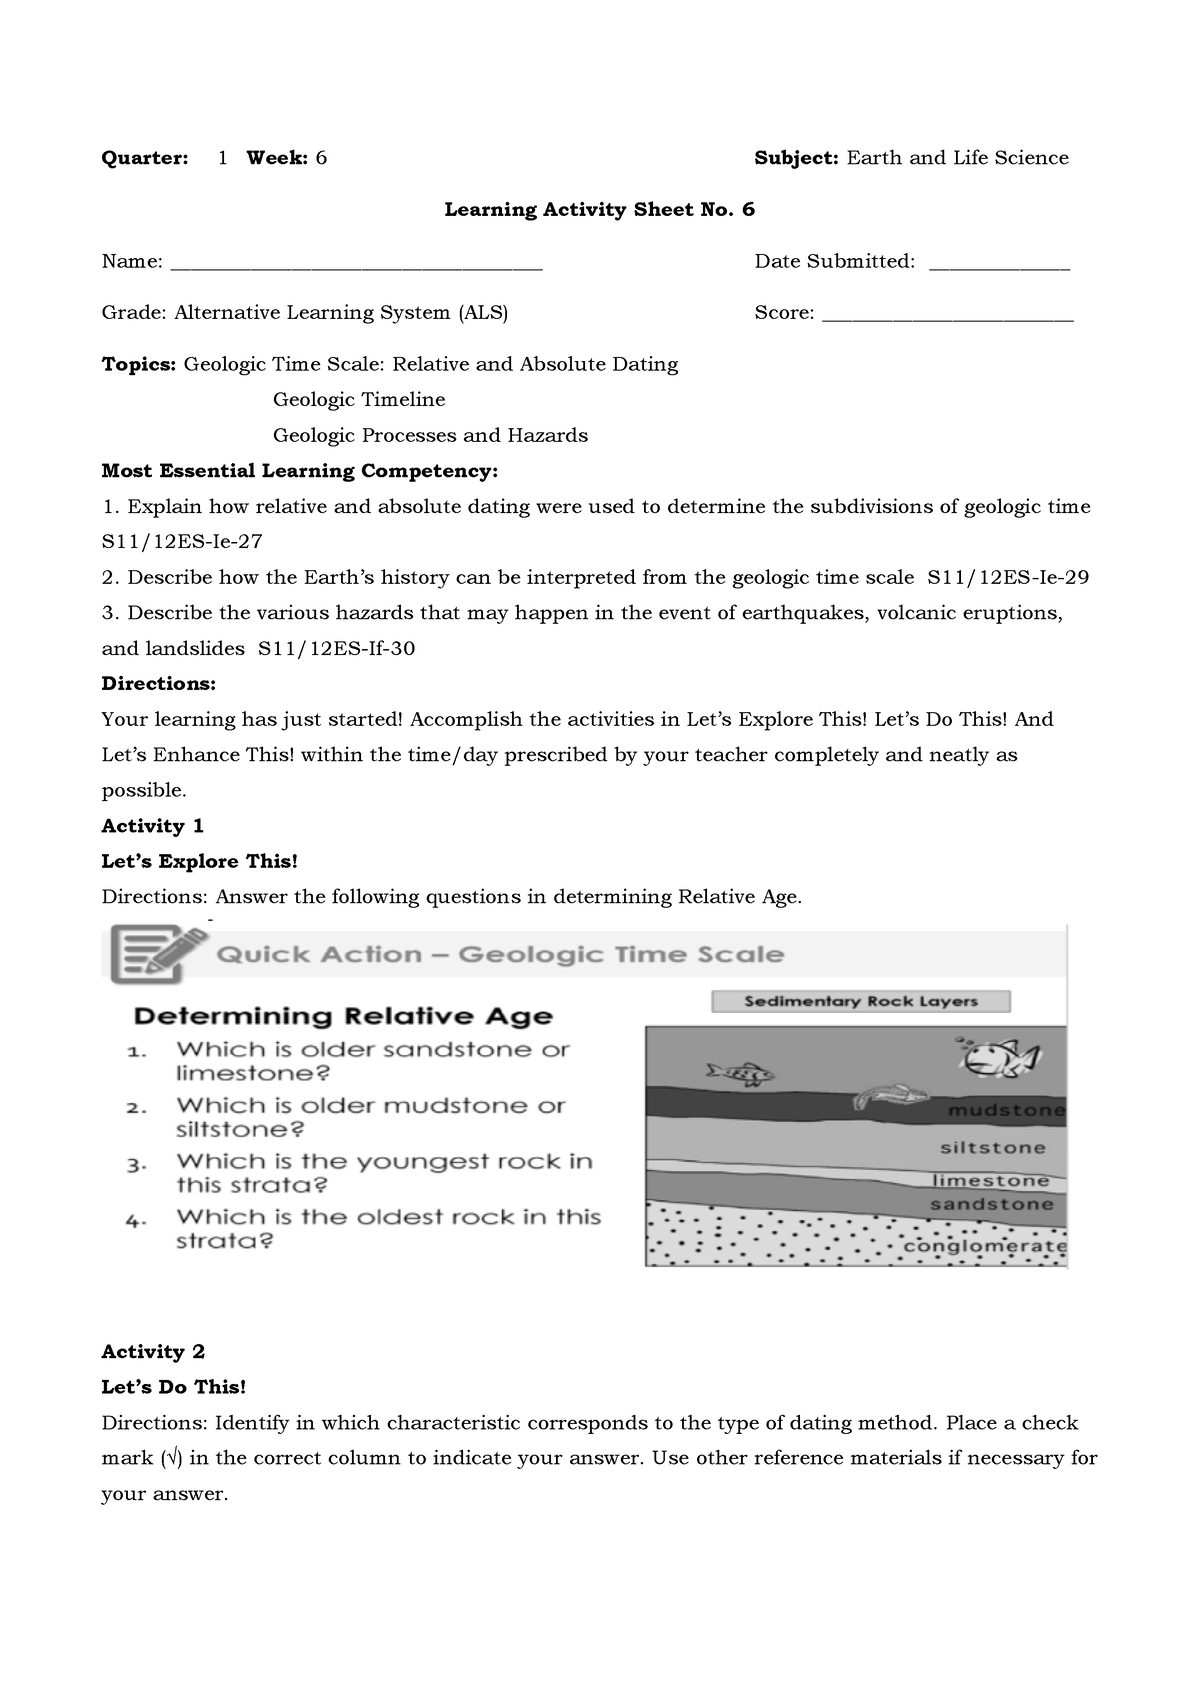 Learning Activity Sheet No 6 Els Quarter 1 Week 6 Subject Earth And Life Science Learning 3682